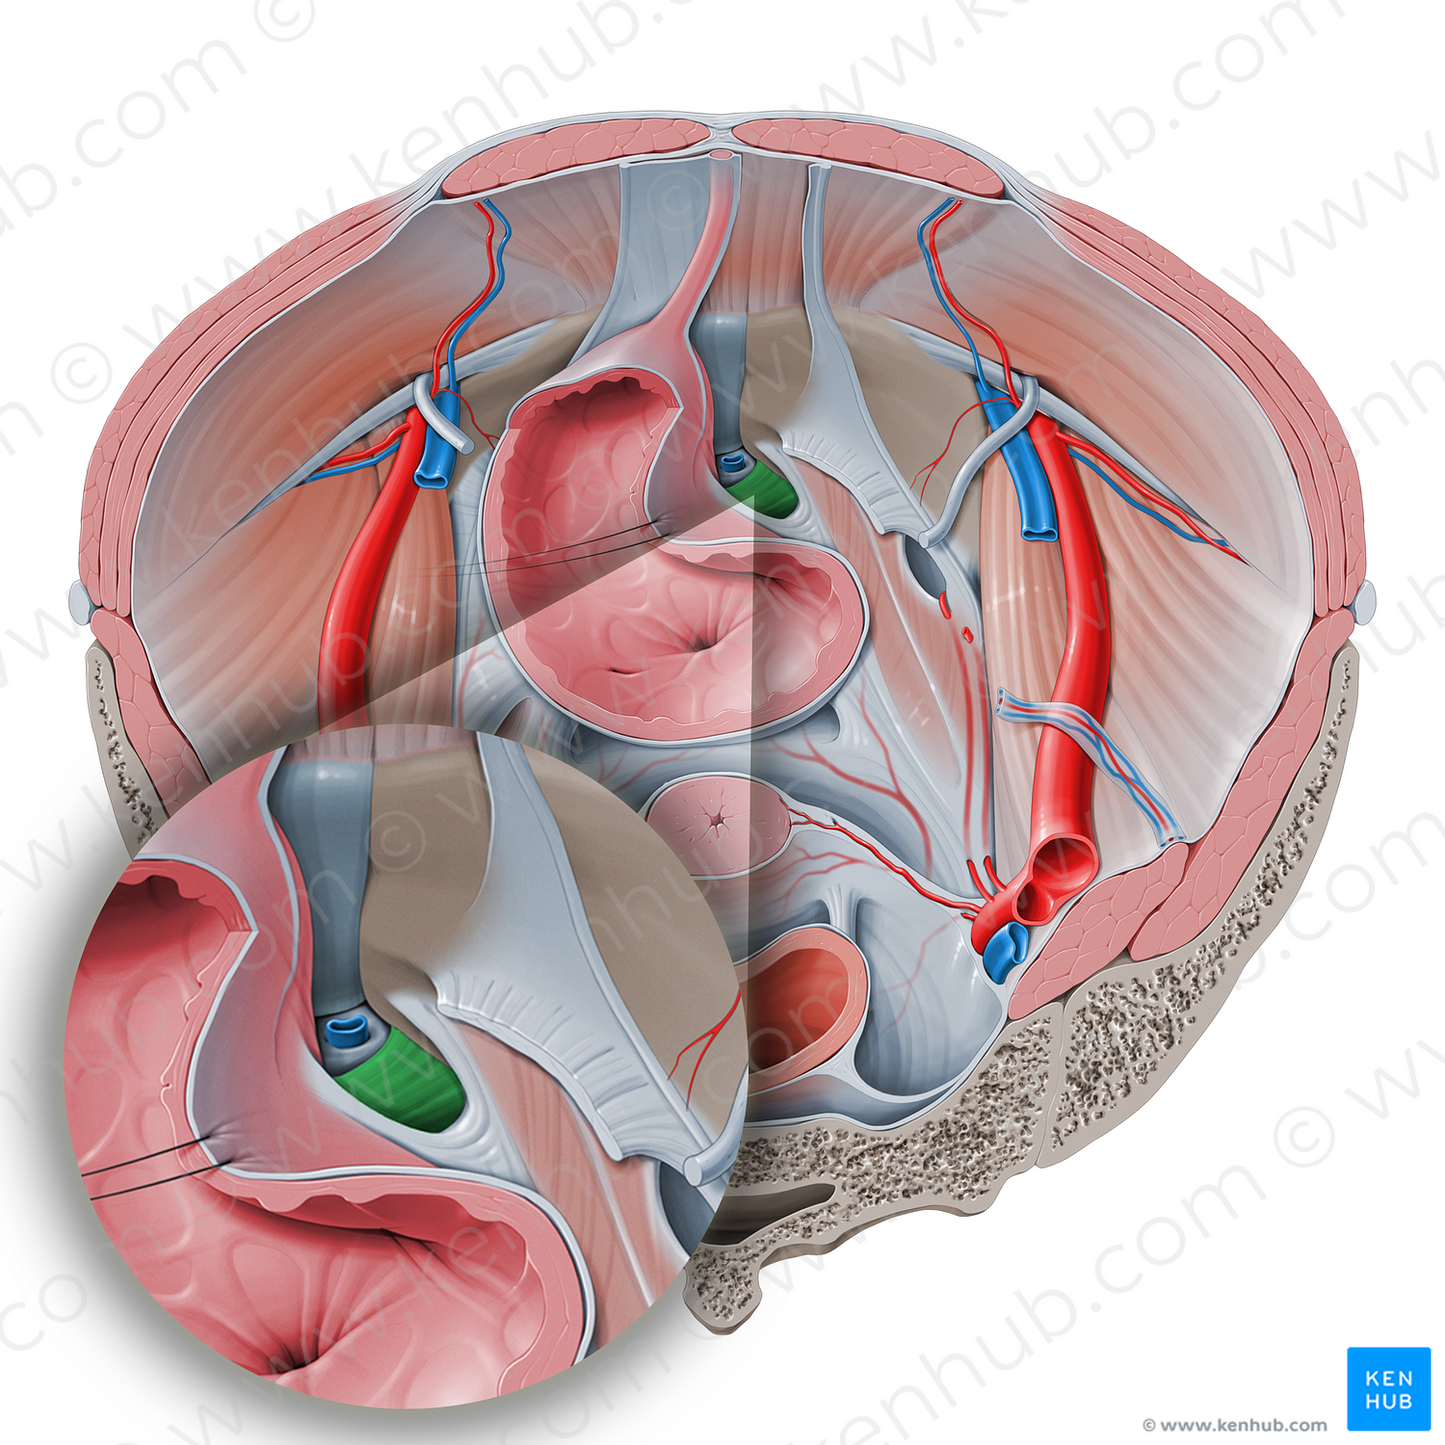 Transverse perineal ligament (#4661)